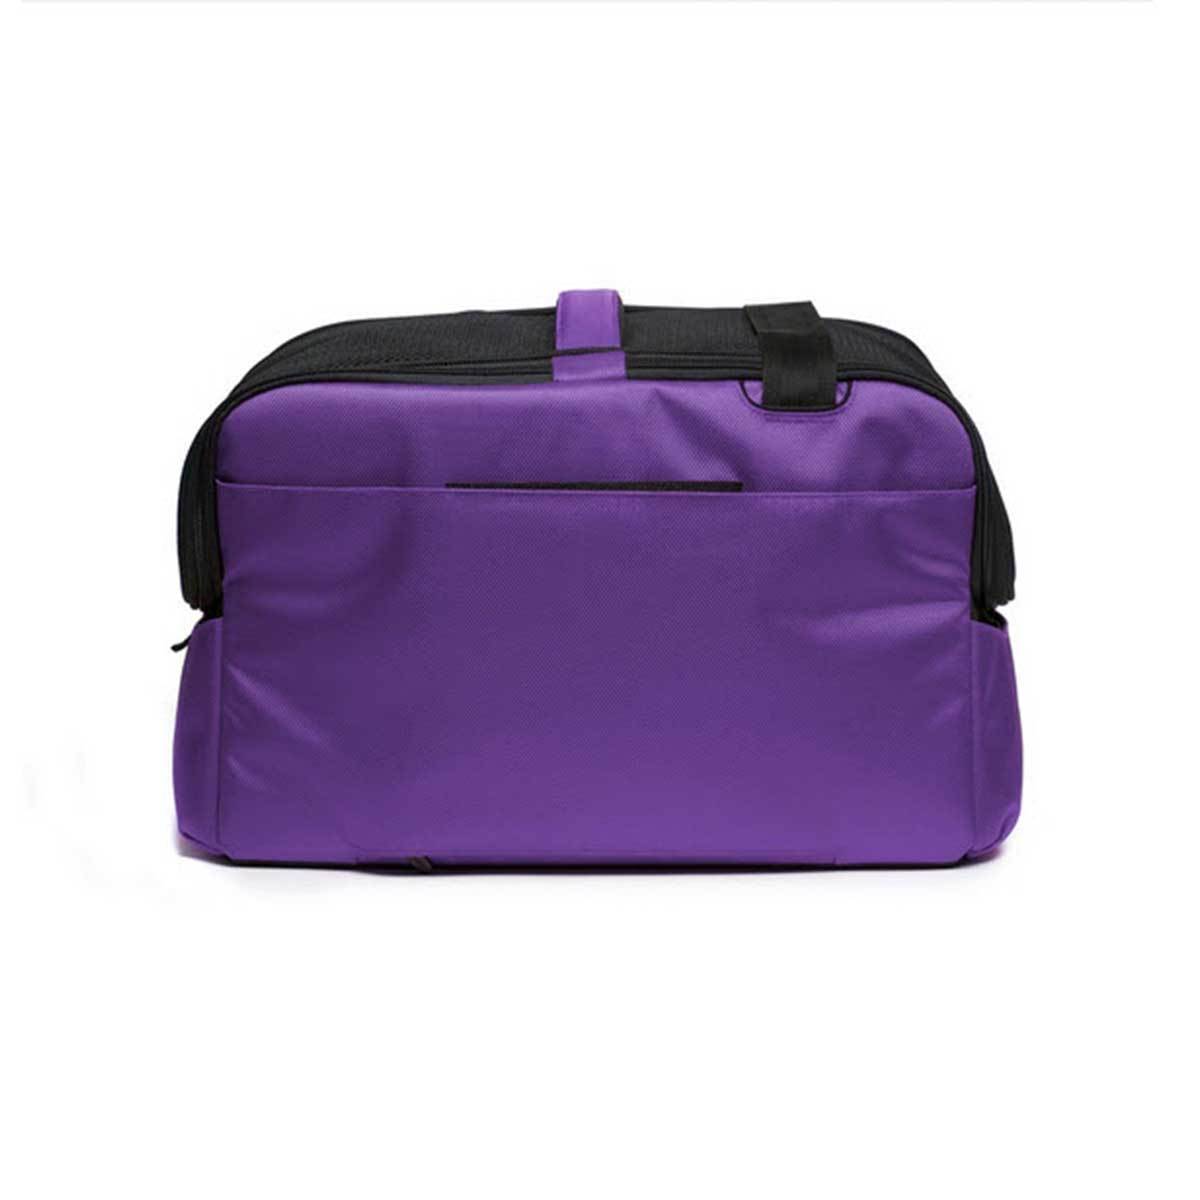 Sleepypod Atom Pet Carrier in Violet | Pawlicious & Company